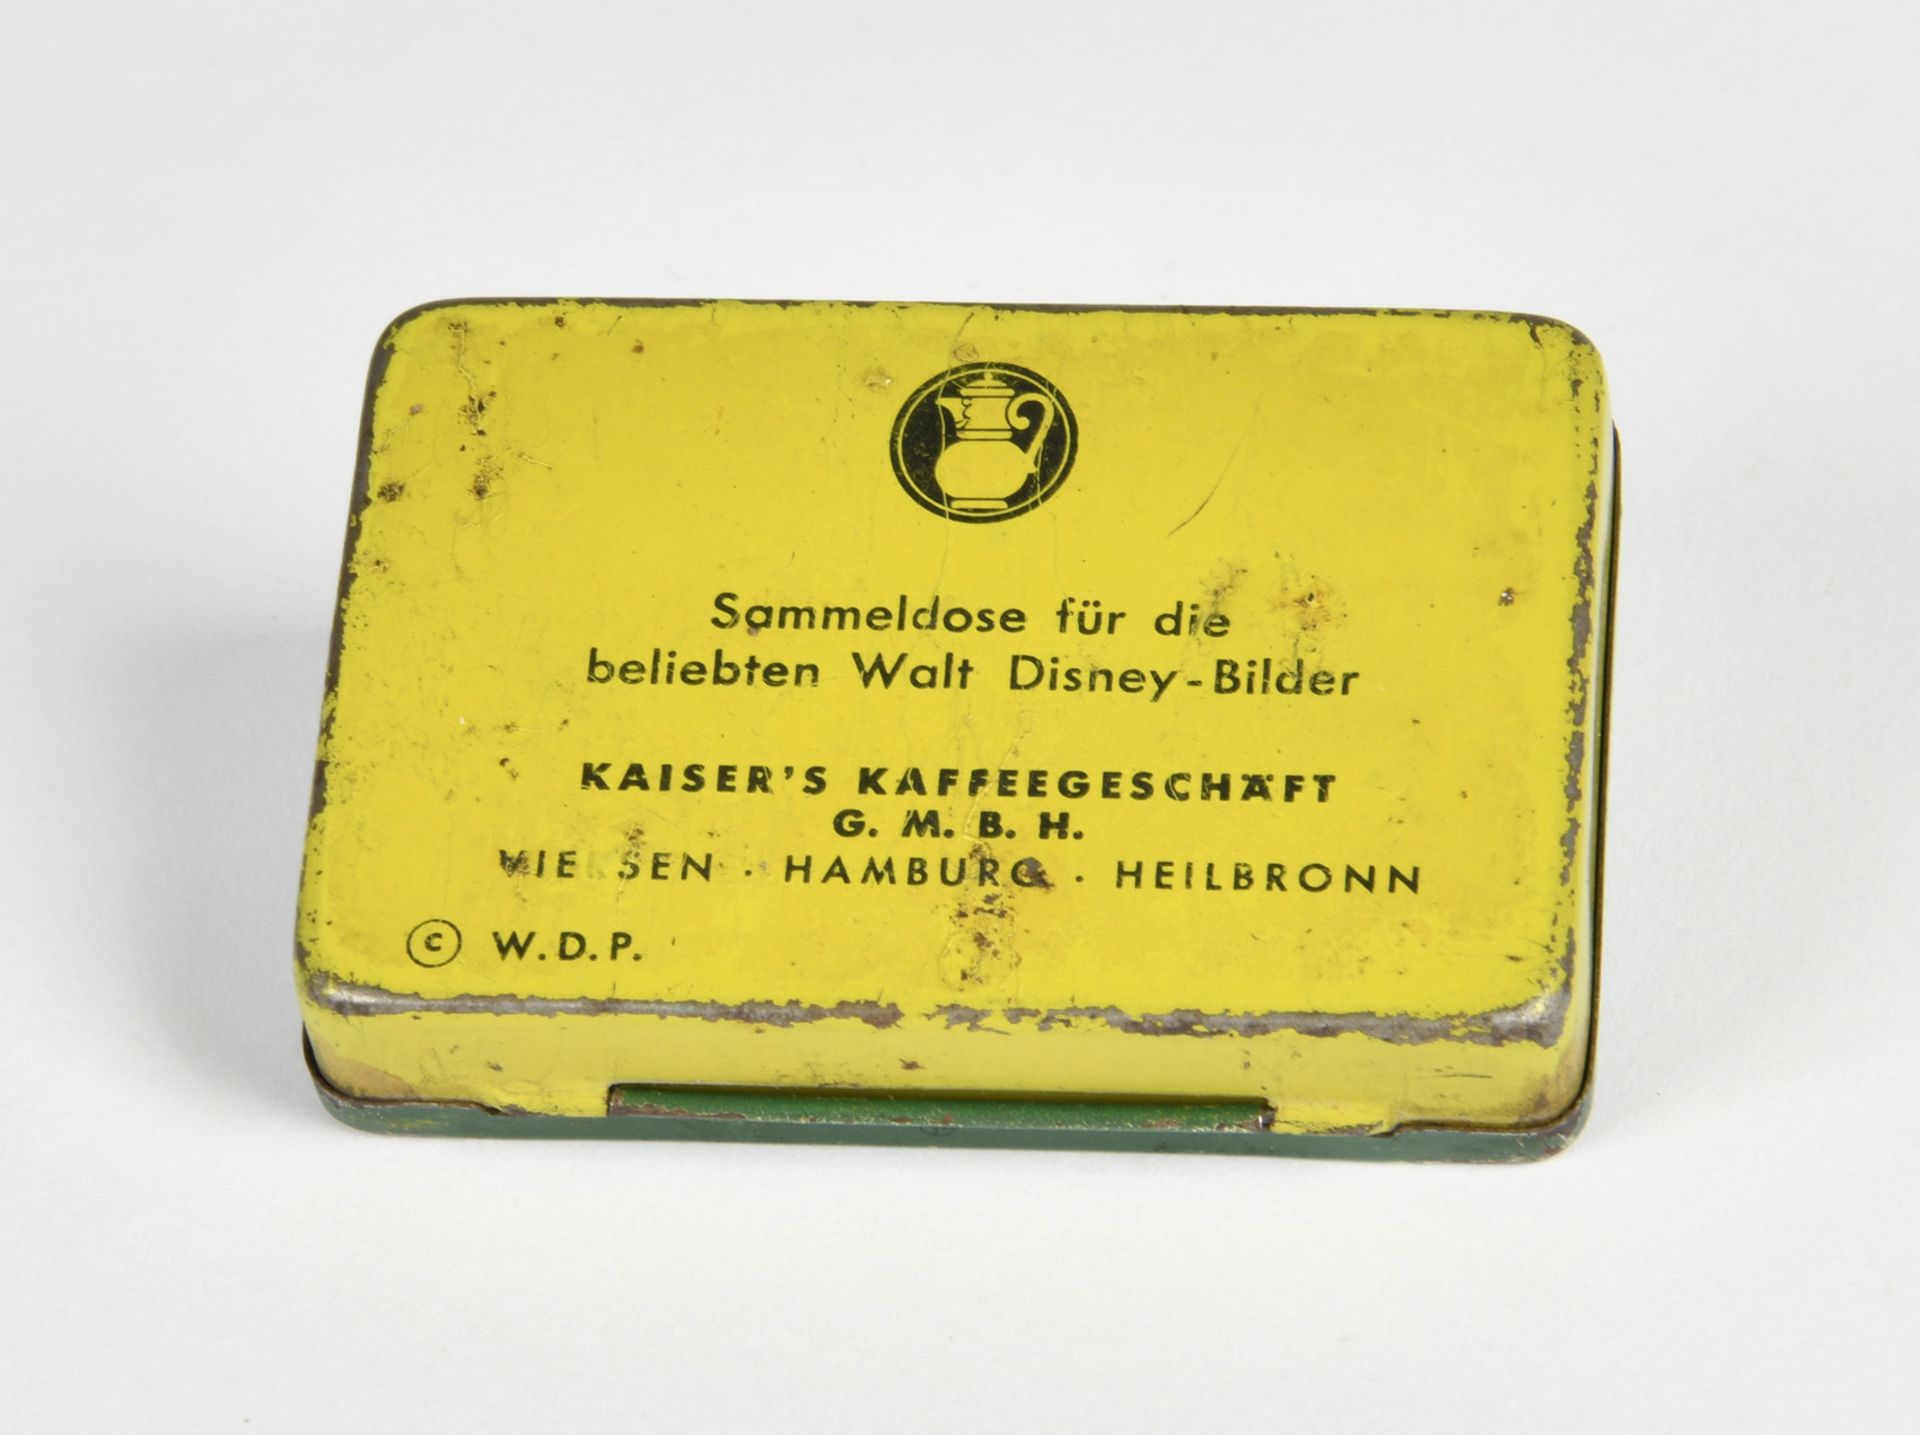 Kaisers Kaffee,collection box for Walt Disney pictures, 7 x 5 cm, paint d., C 2- - Image 2 of 4